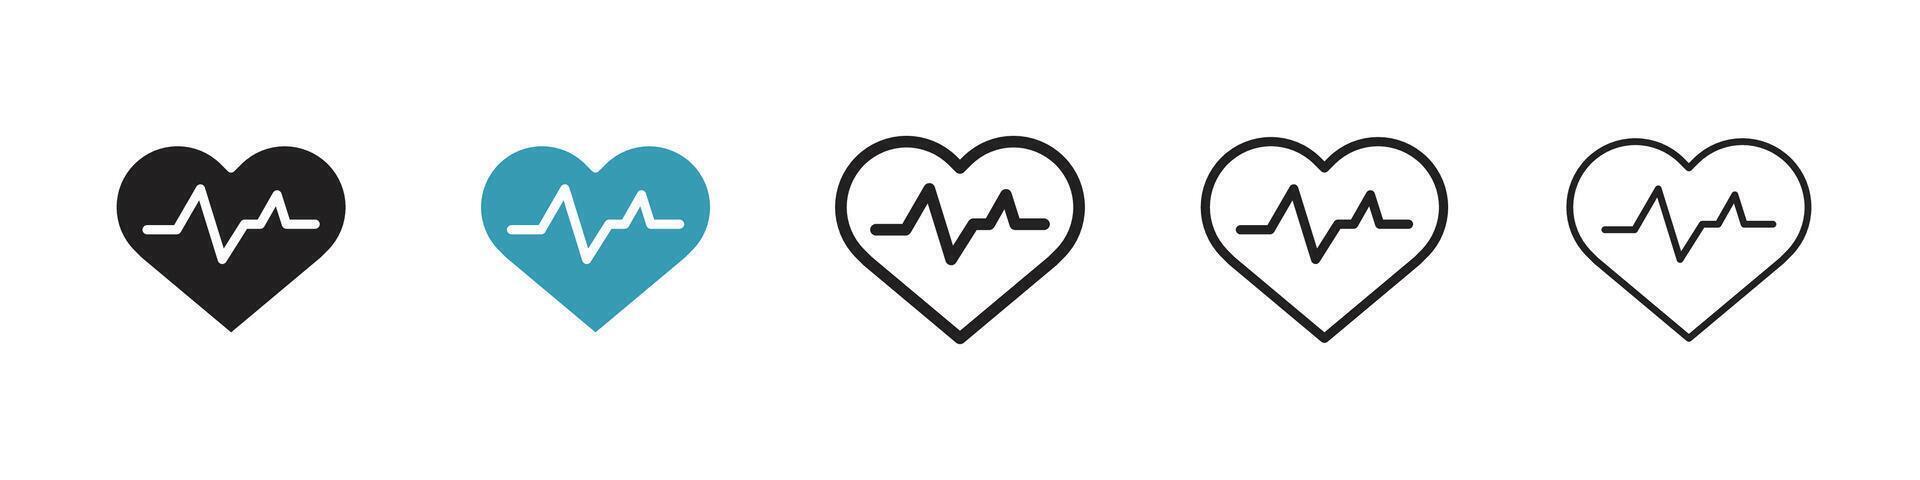 Heart rate pulse icon vector